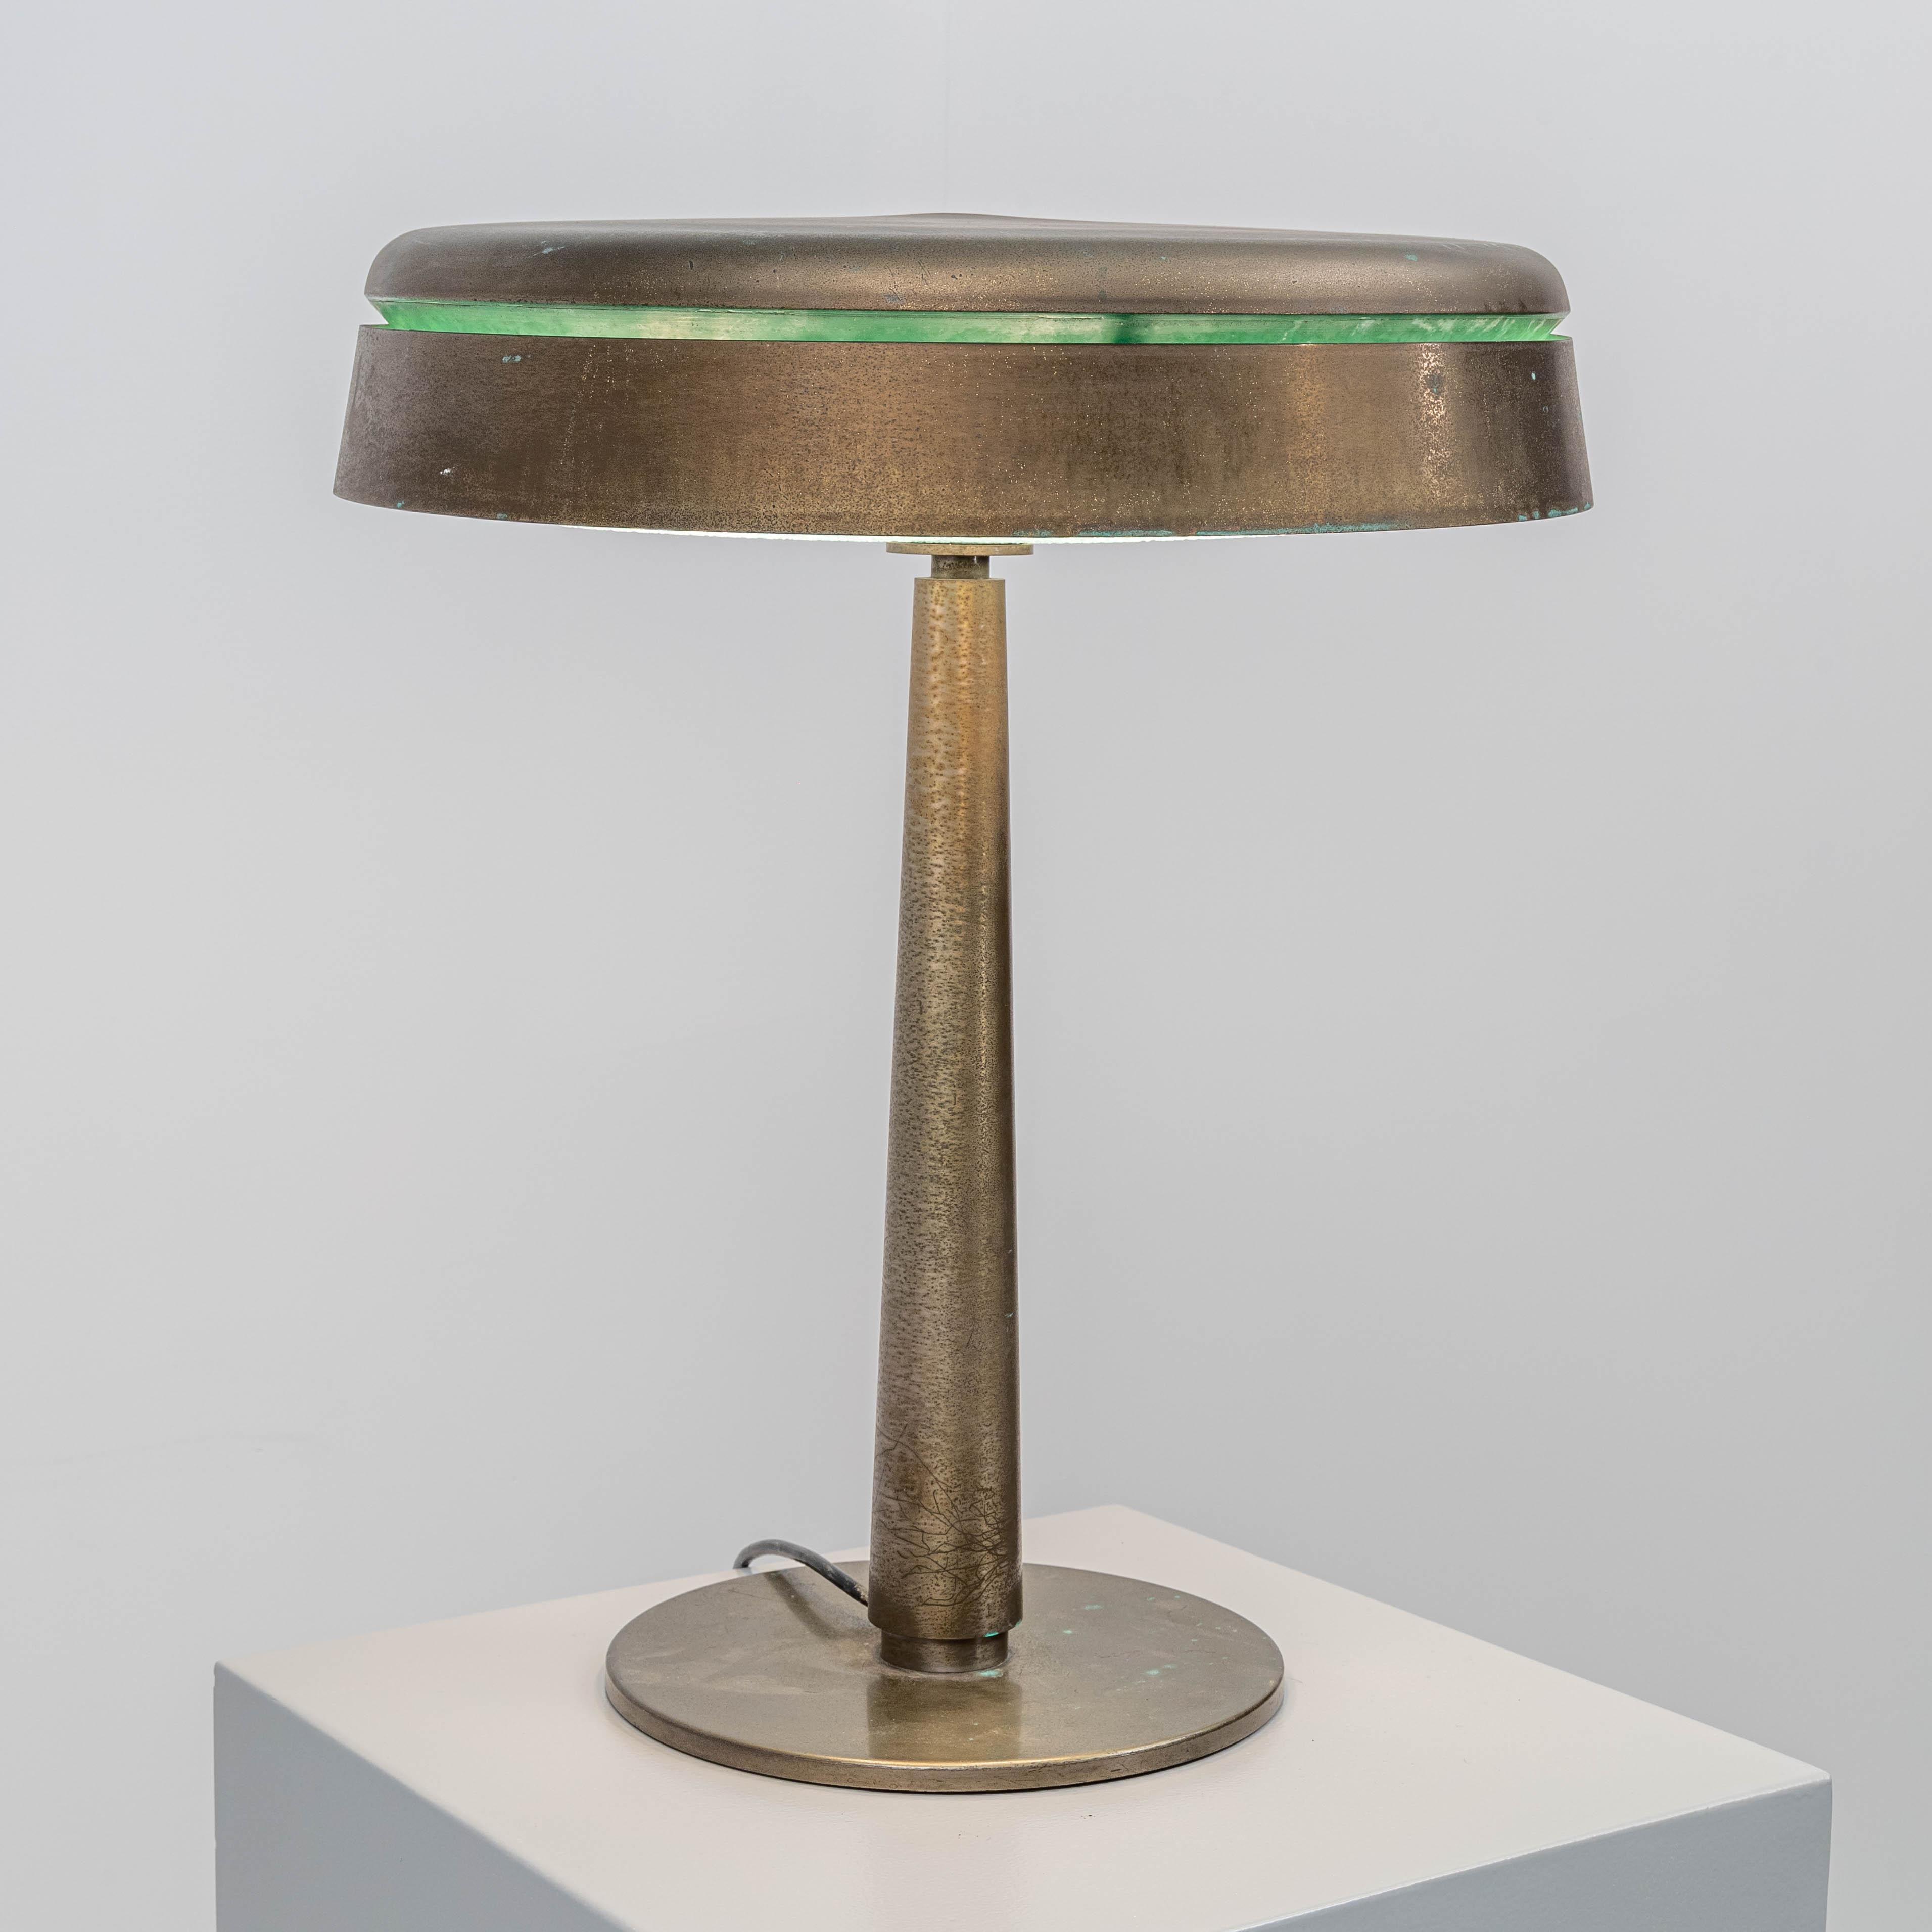 Max Ingrand Table Lamp #2278 for Fontana Arte, Italy, 1960 In Good Condition For Sale In Amsterdam, NL